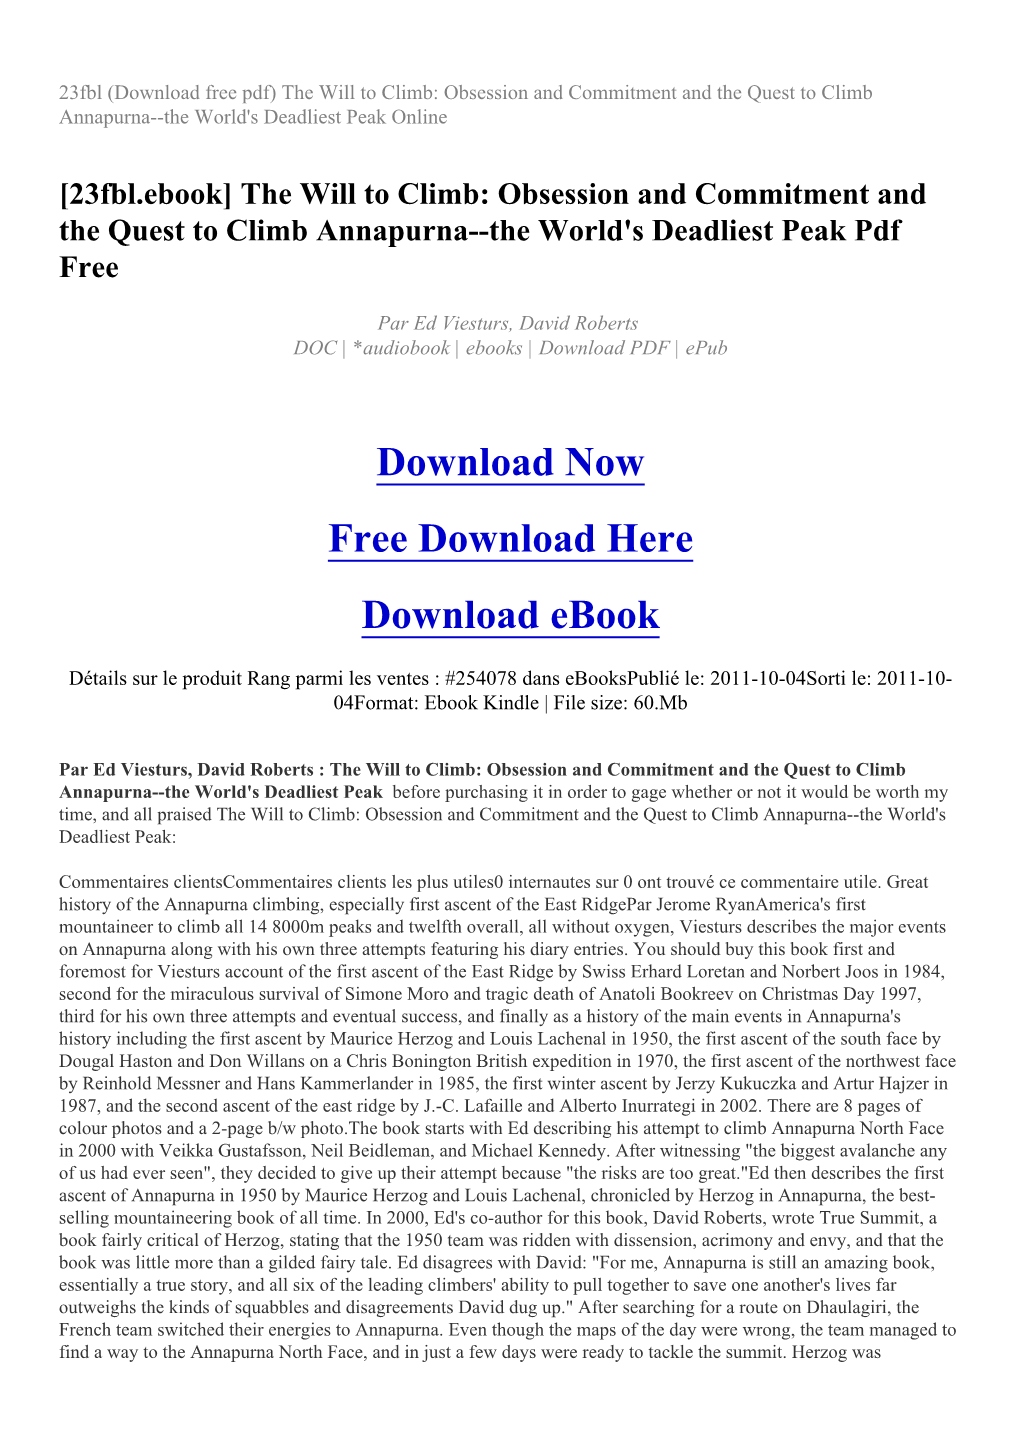 23Fbl (Download Free Pdf) the Will to Climb: Obsession and Commitment and the Quest to Climb Annapurna--The World's Deadliest Peak Online